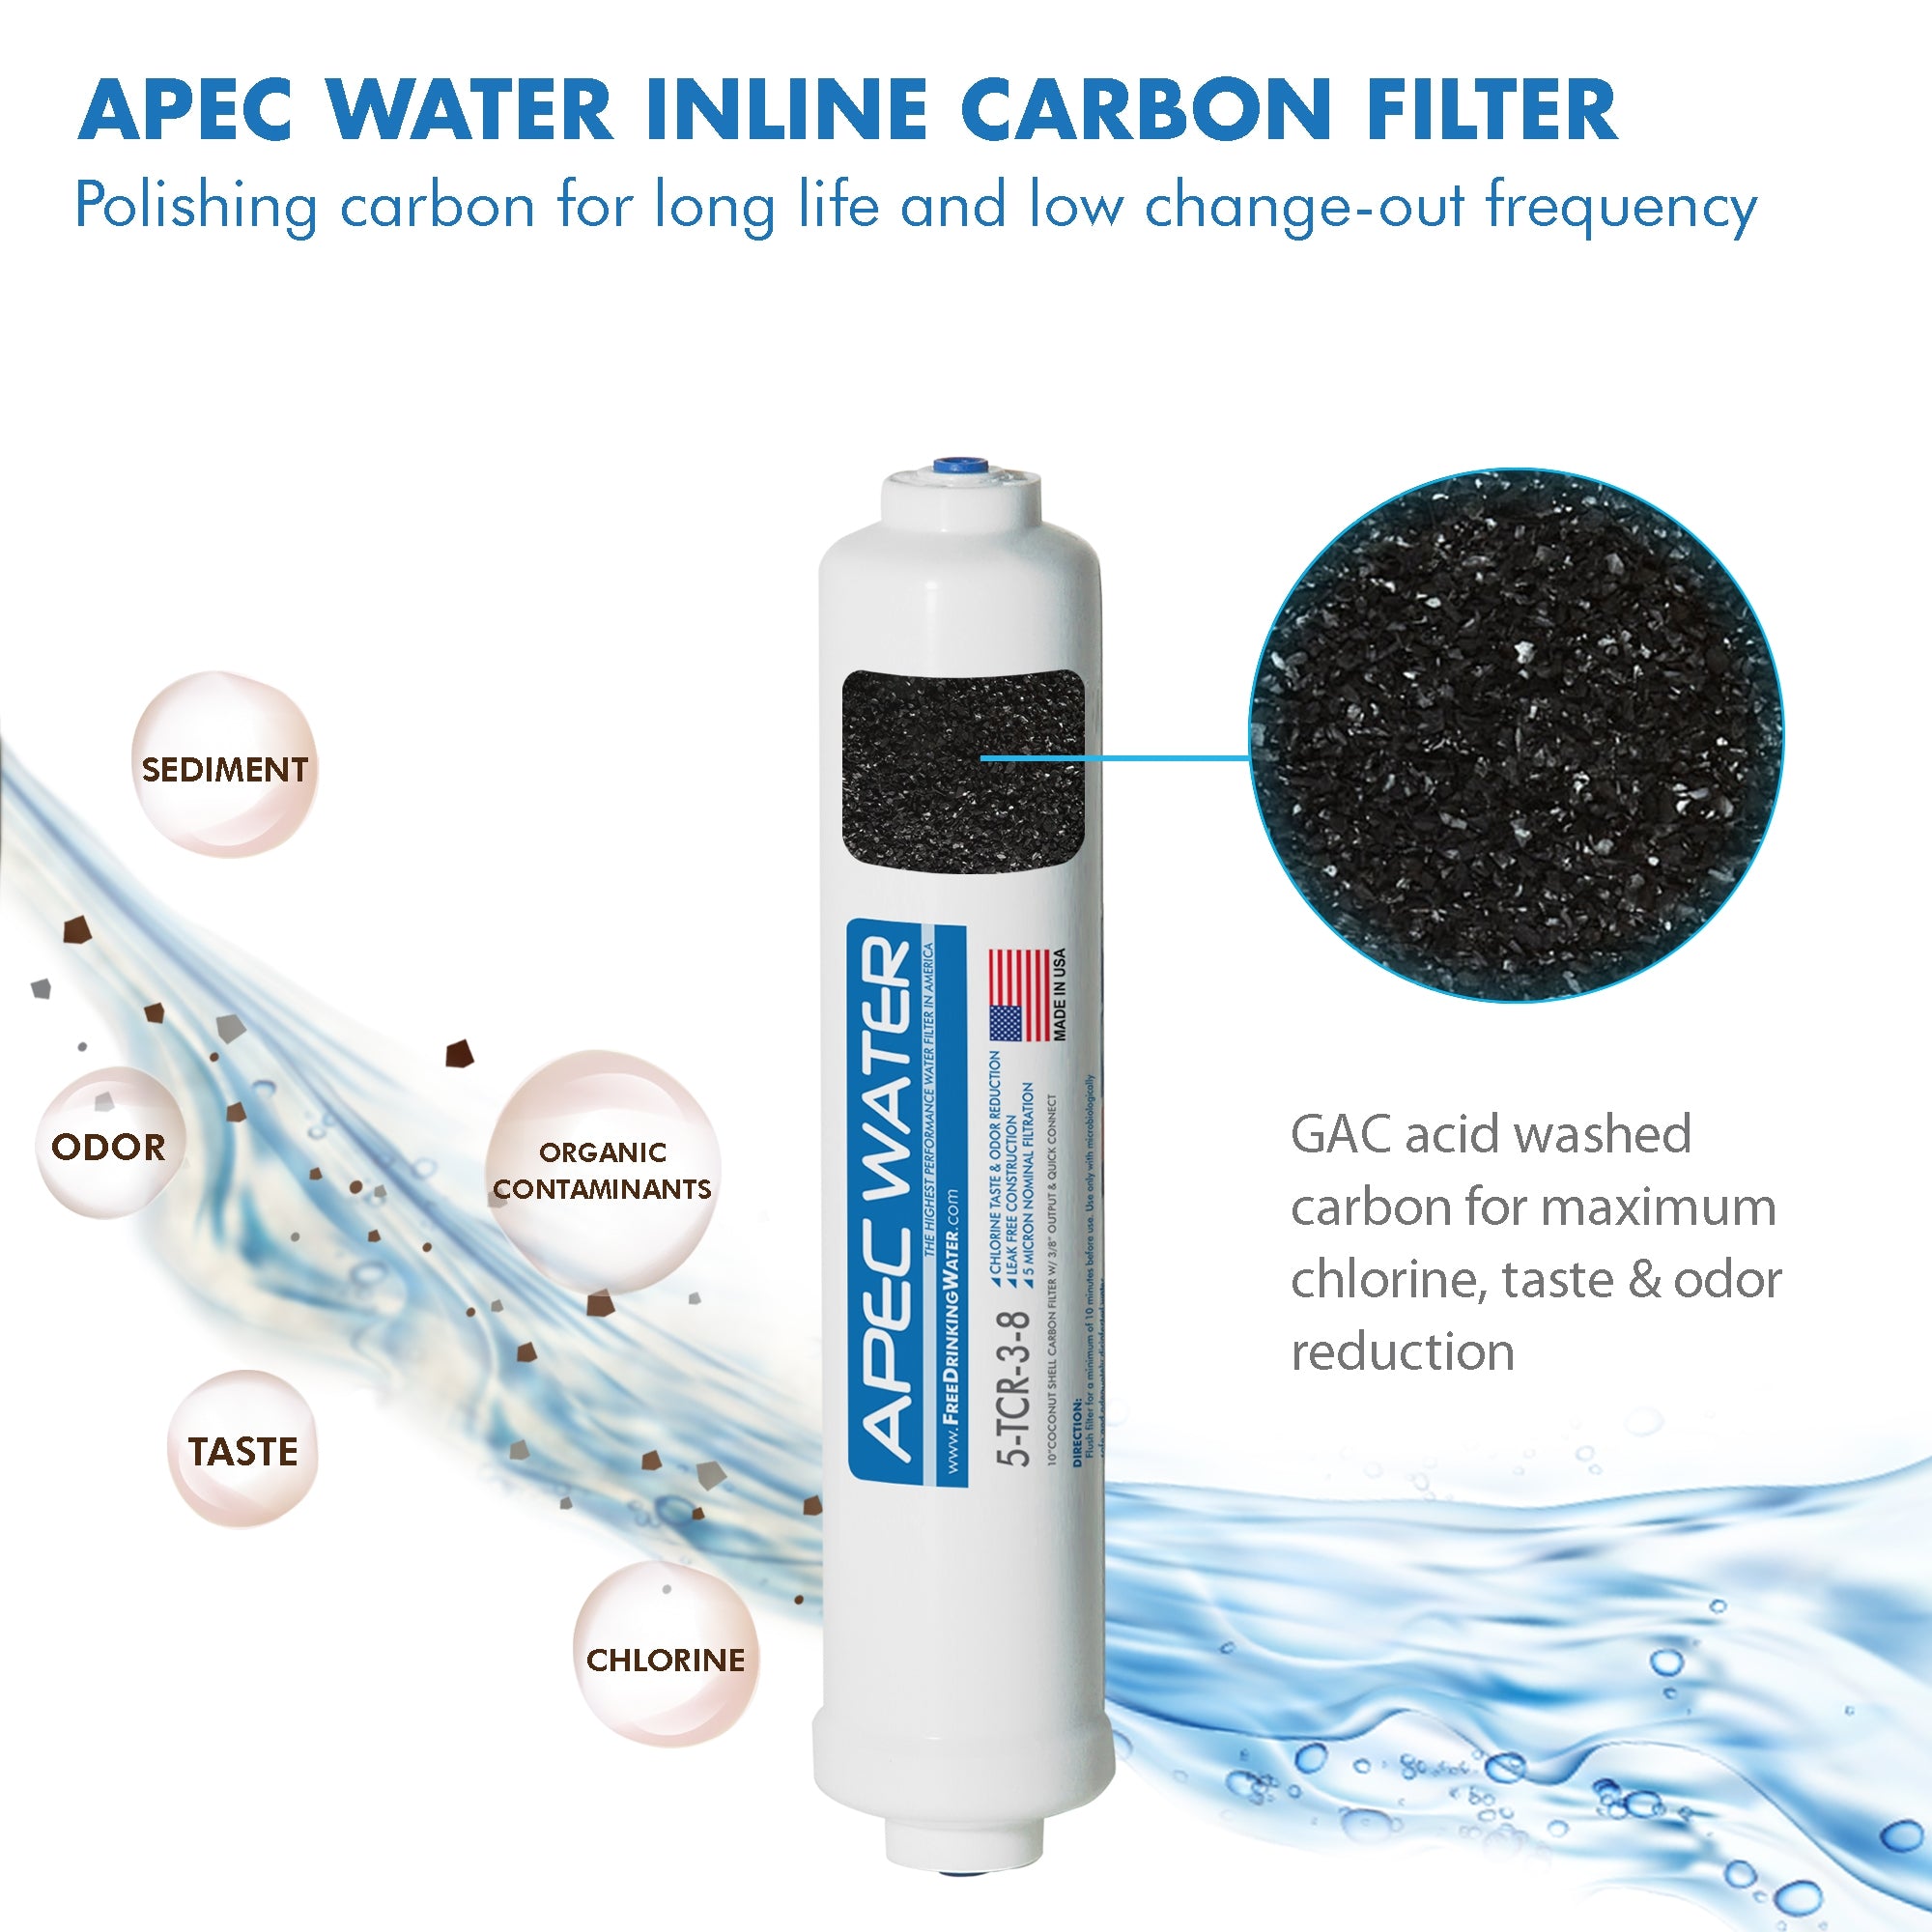 APEC RO Replacement Filters Complete Filter Set for ULTIMATE RO-45 and RO-PUMP Models - With 3/8" Quick Dispense Upgrade (Stages 1-5)